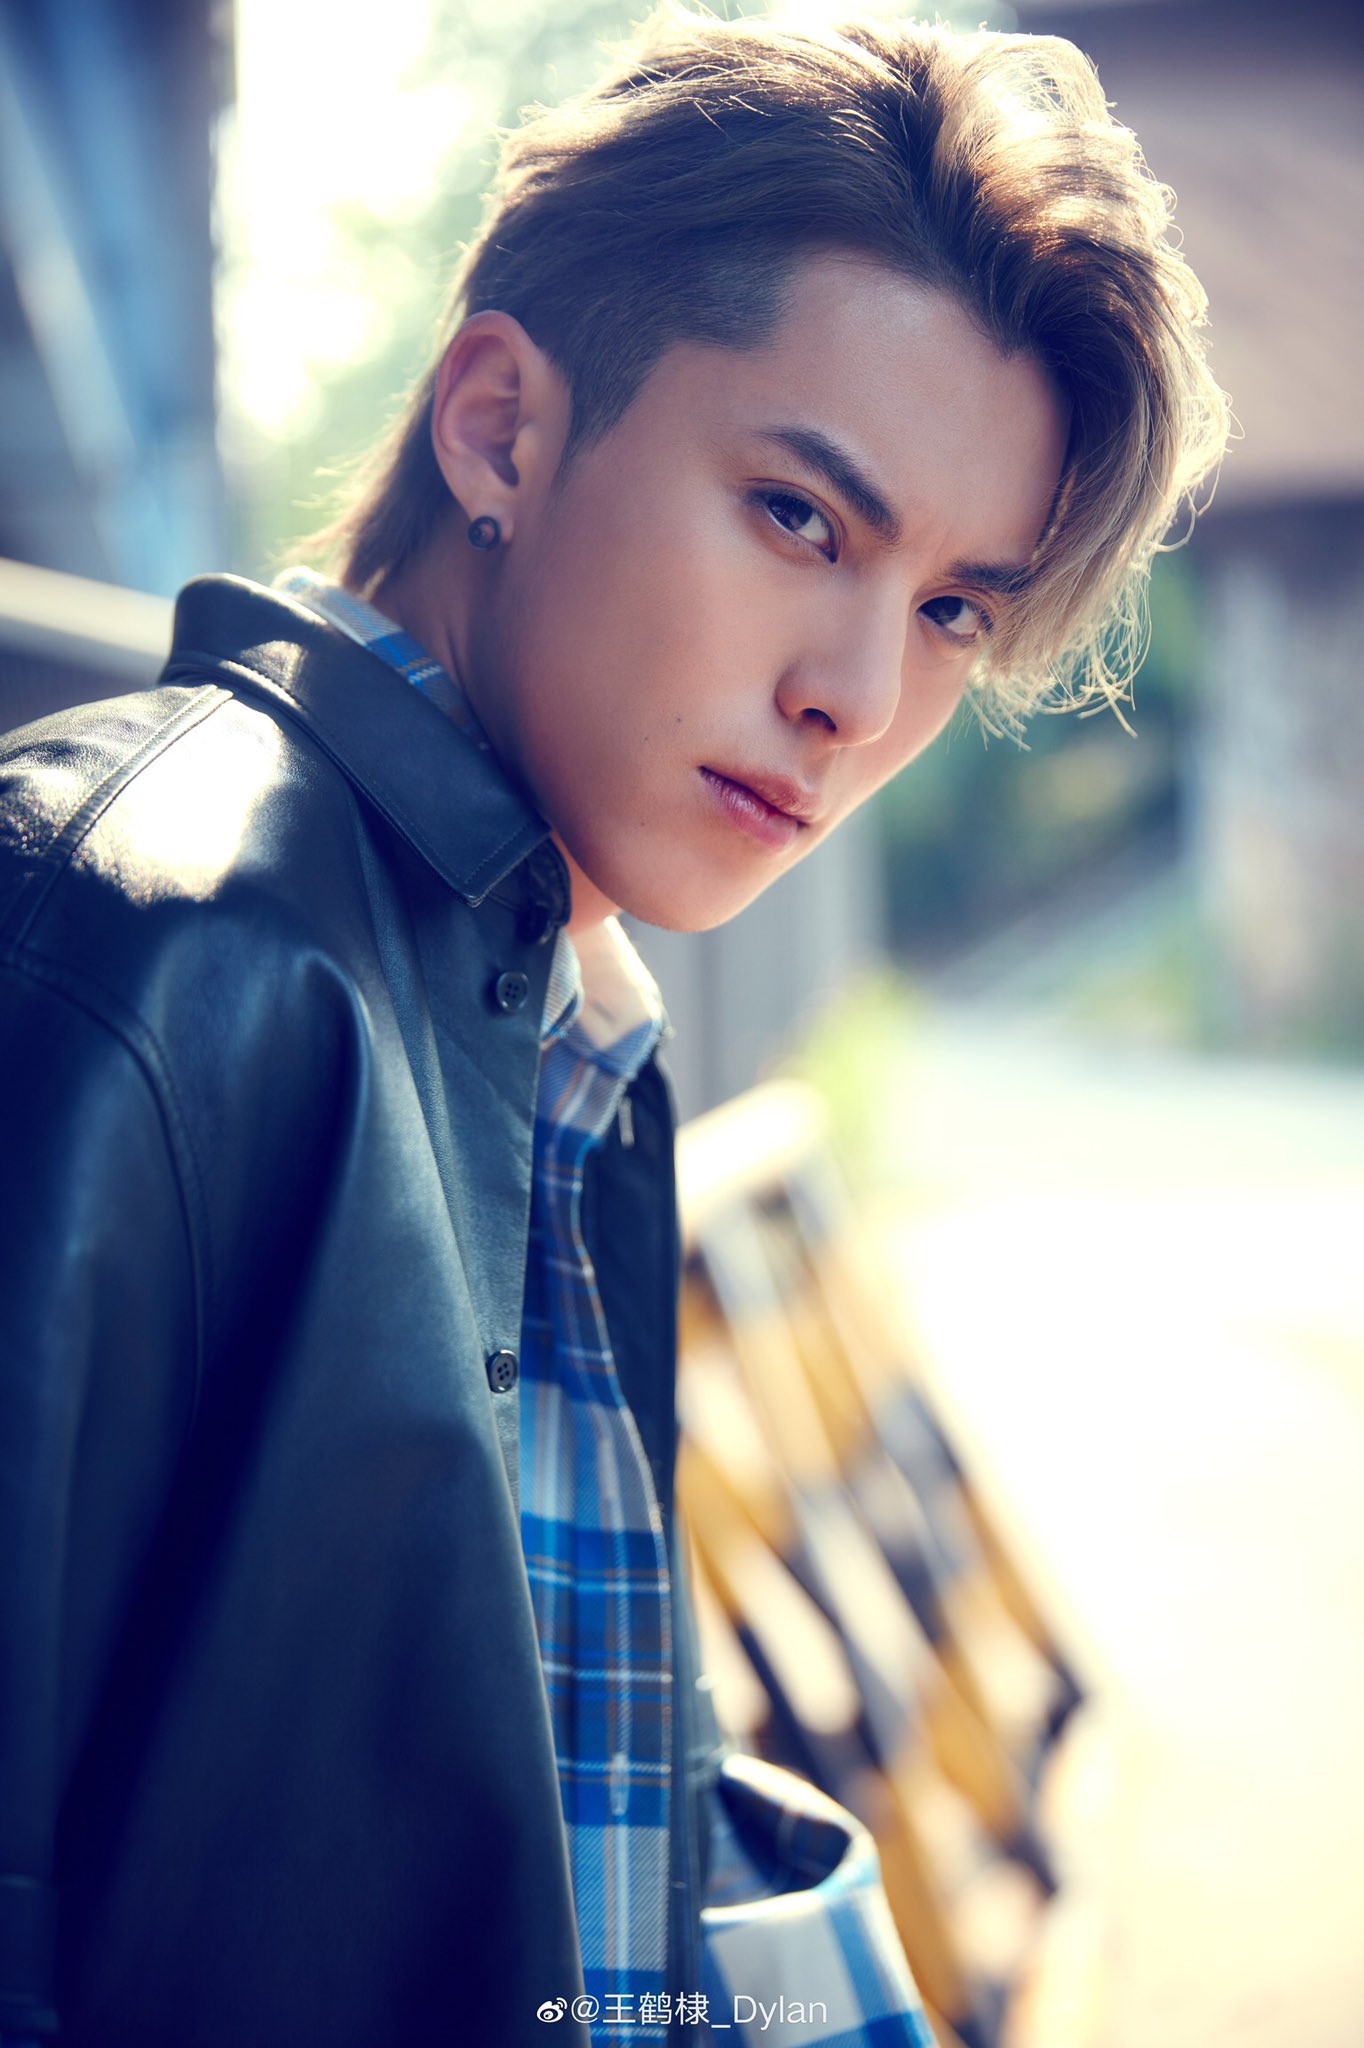 dylan wang faded hair style｜TikTok Search